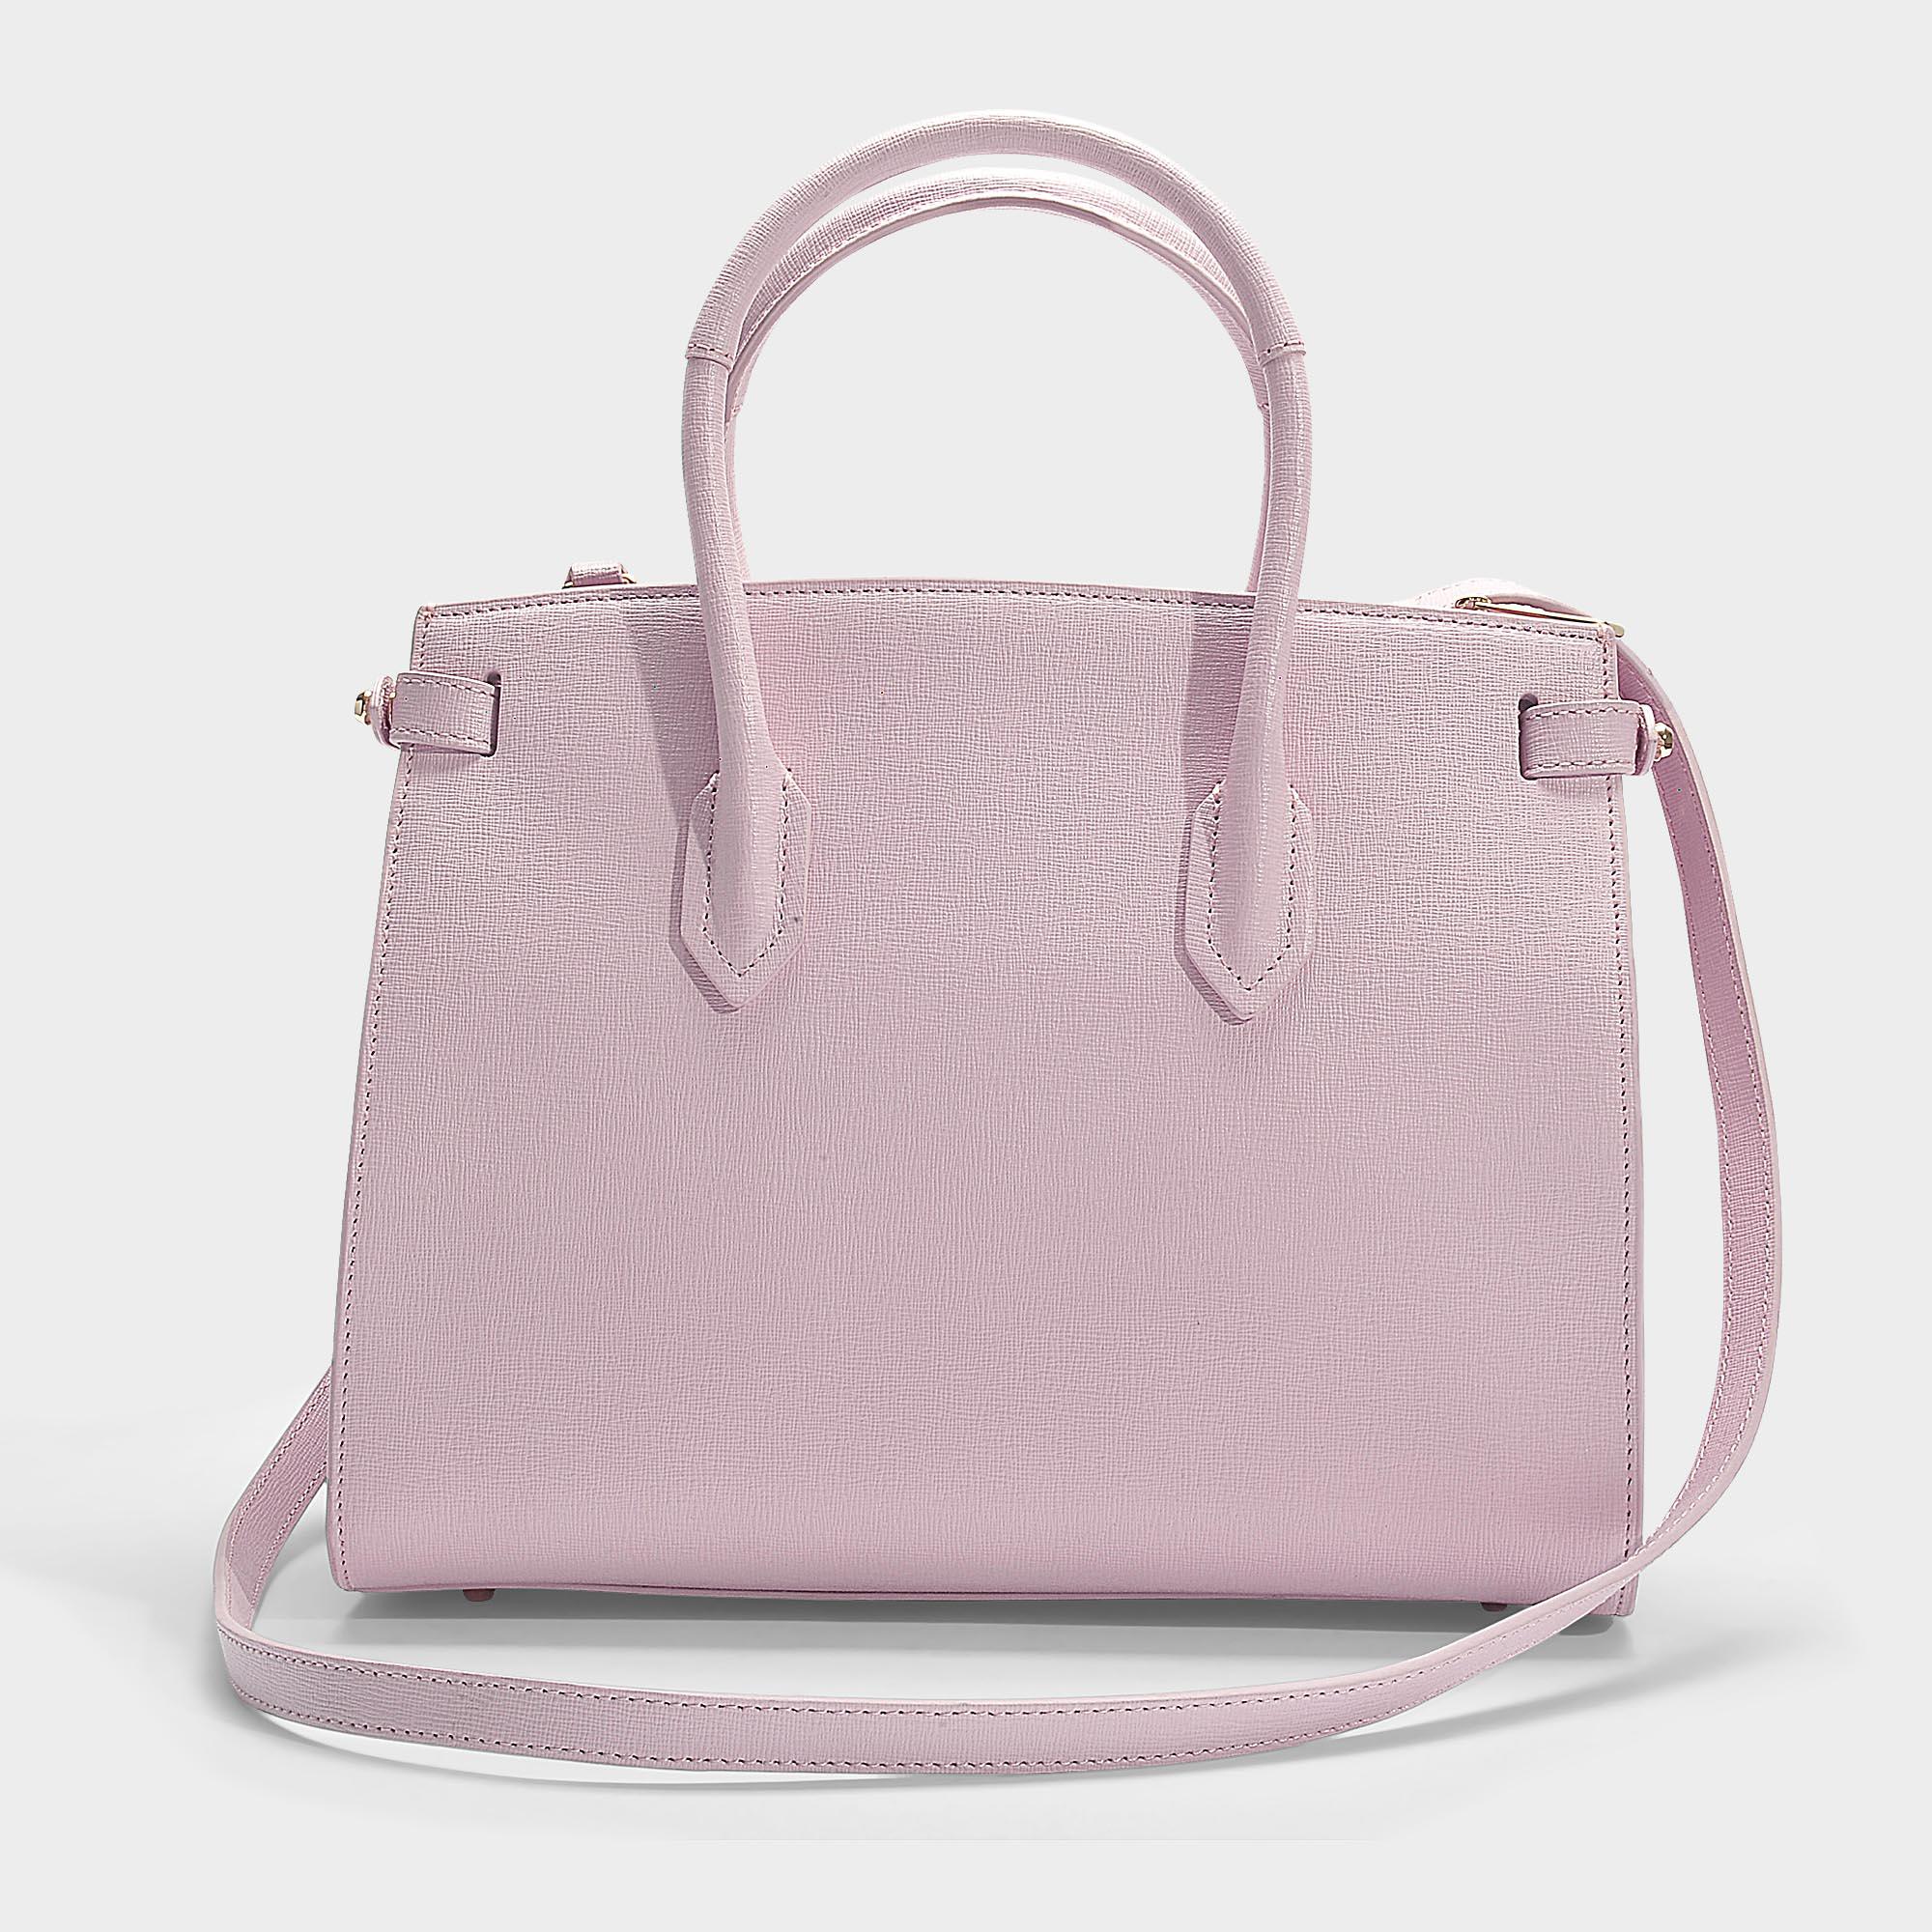 Furla Pin Small East/west Tote In Black Calfskin in Pink - Lyst